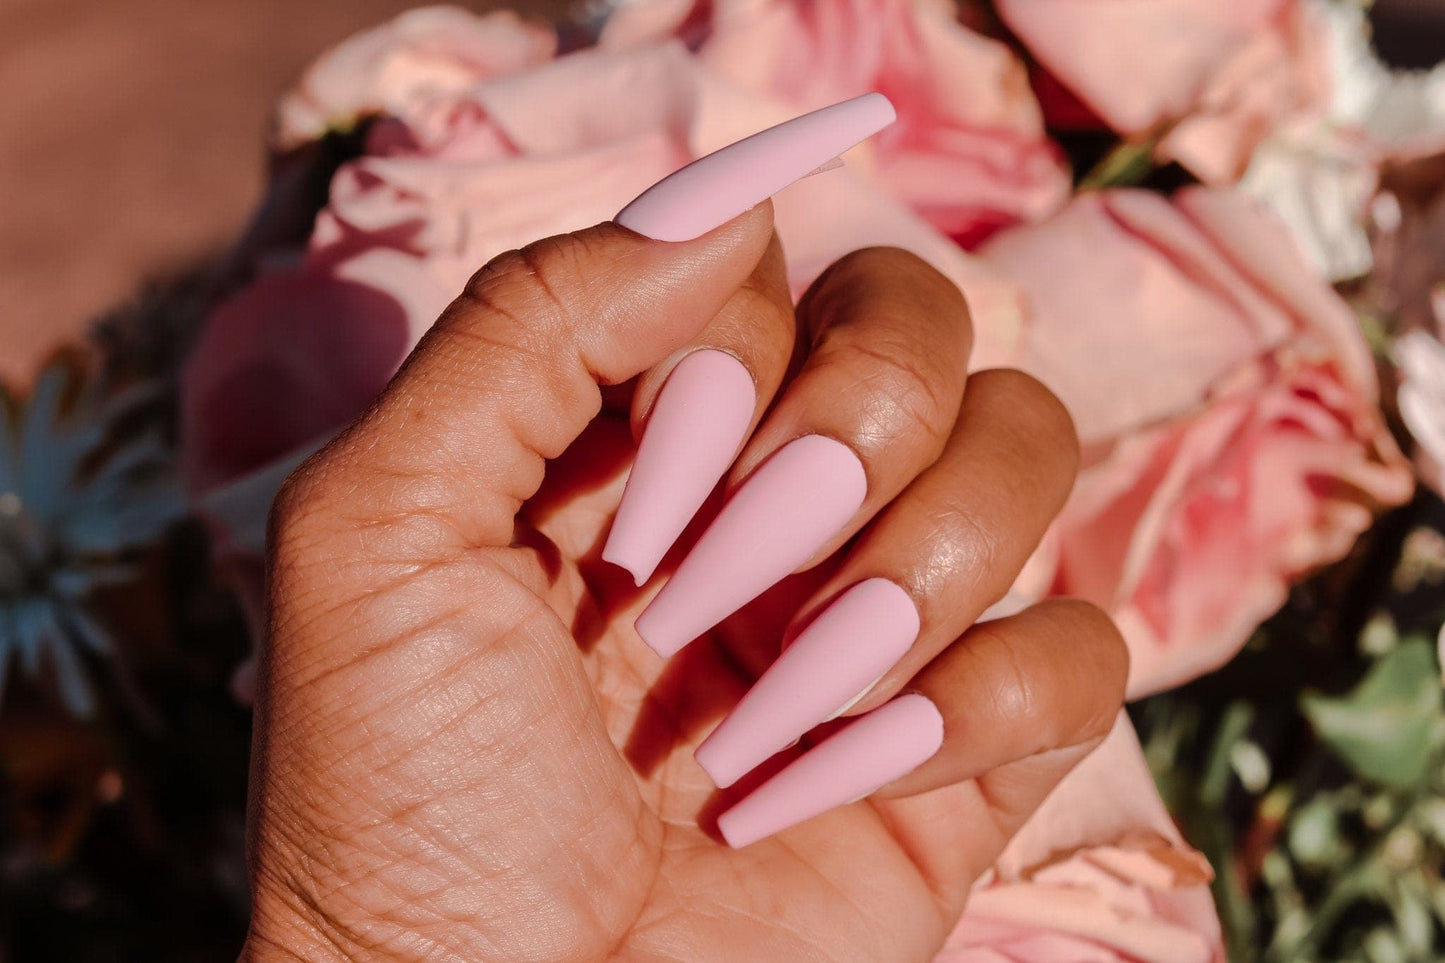 PINK LEMONADE - LUXE NAILS - FEMME by Alonna Elaine